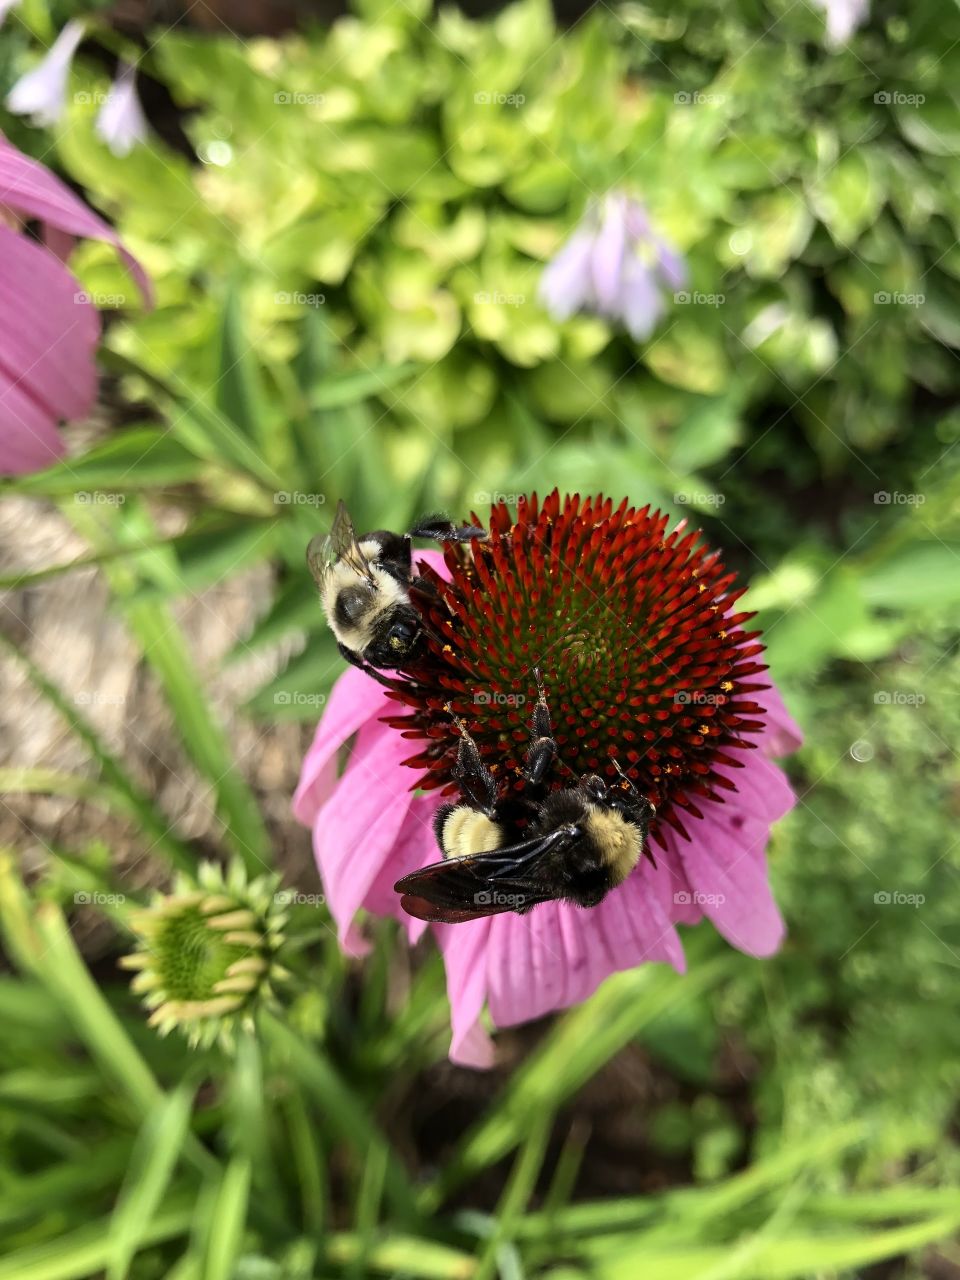 Bees on echinacea 